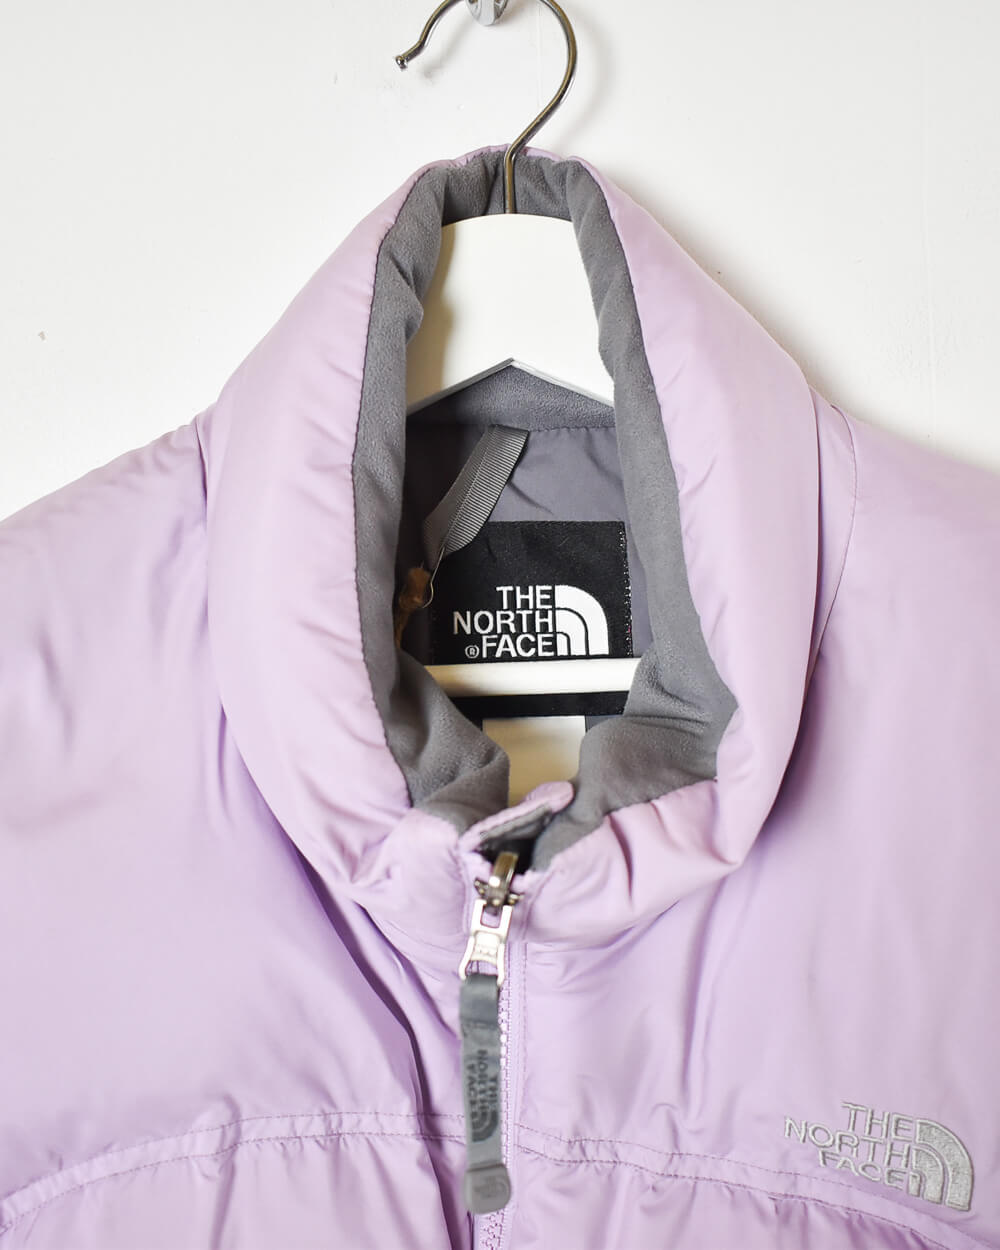 Purple The North Face Women's 700 Down Puffer Jacket - X-Large